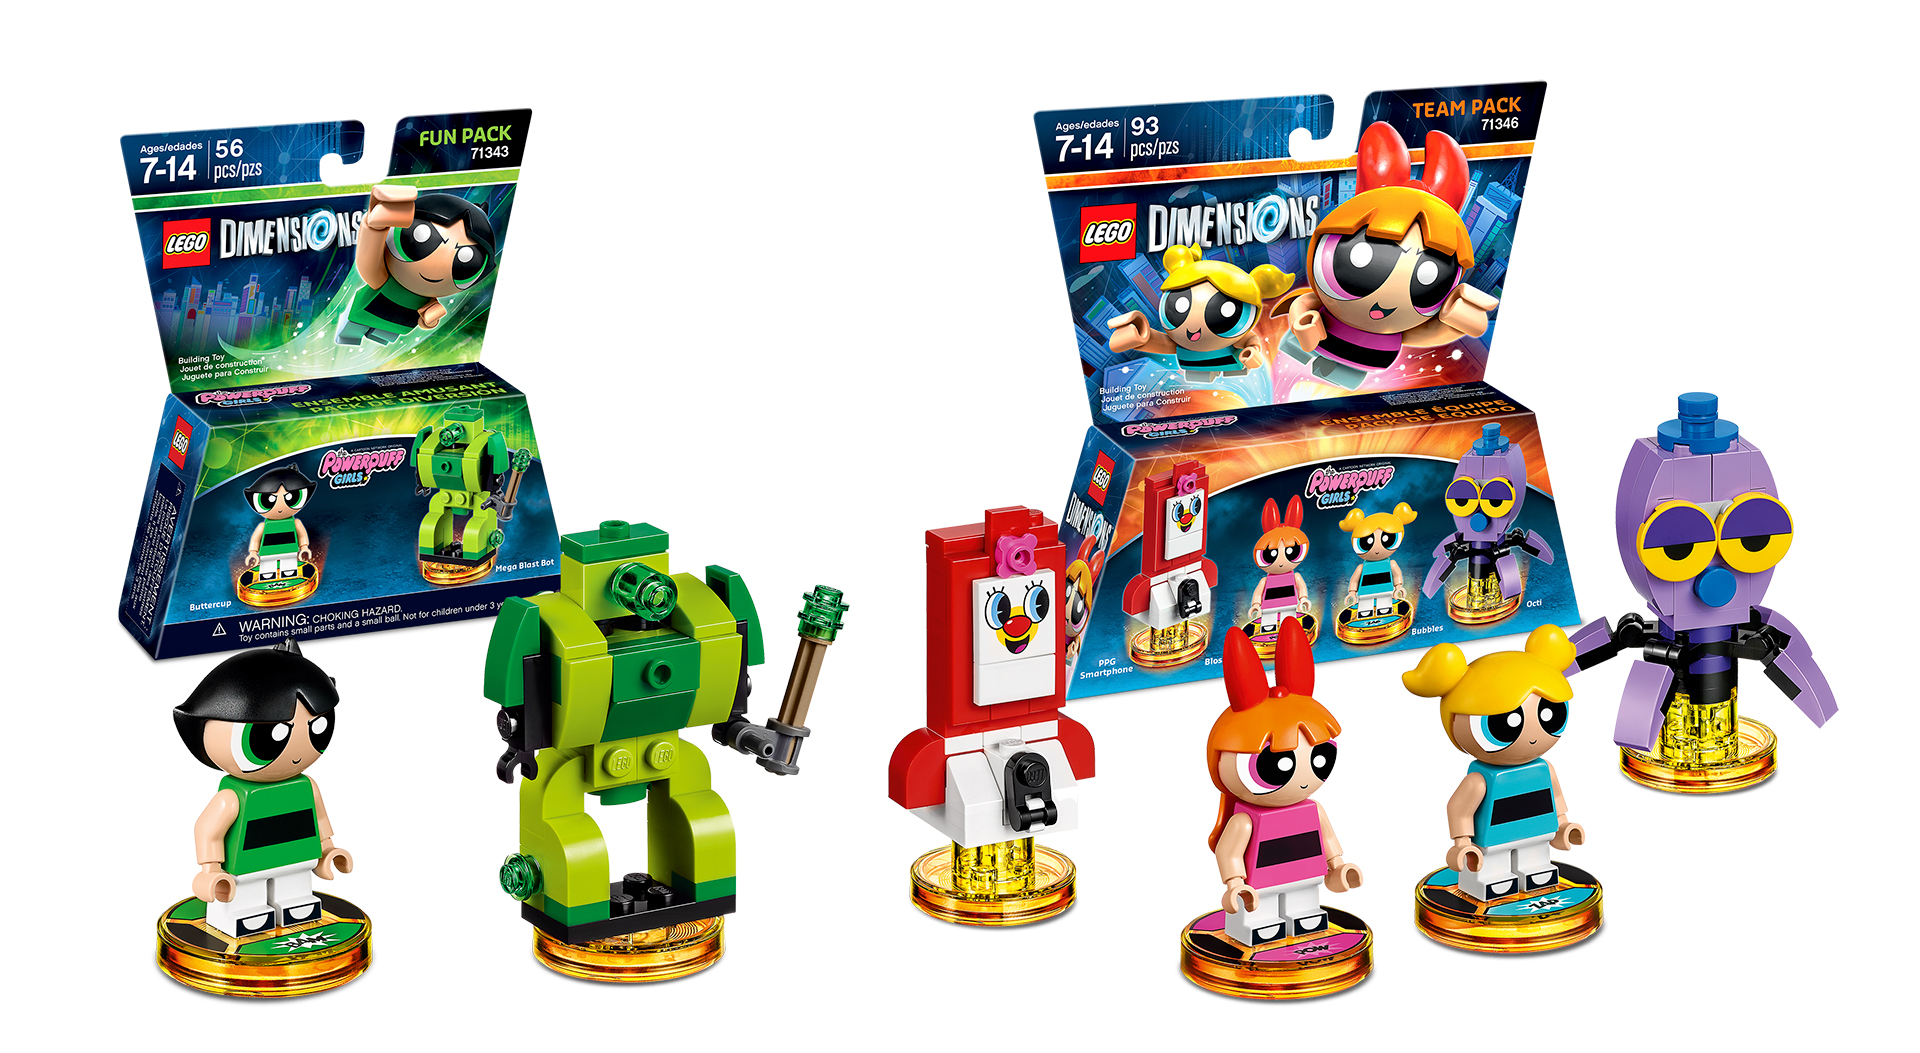 The Powerpuff Girls And Teen Titans Go! Come To LEGO Dimensions In September